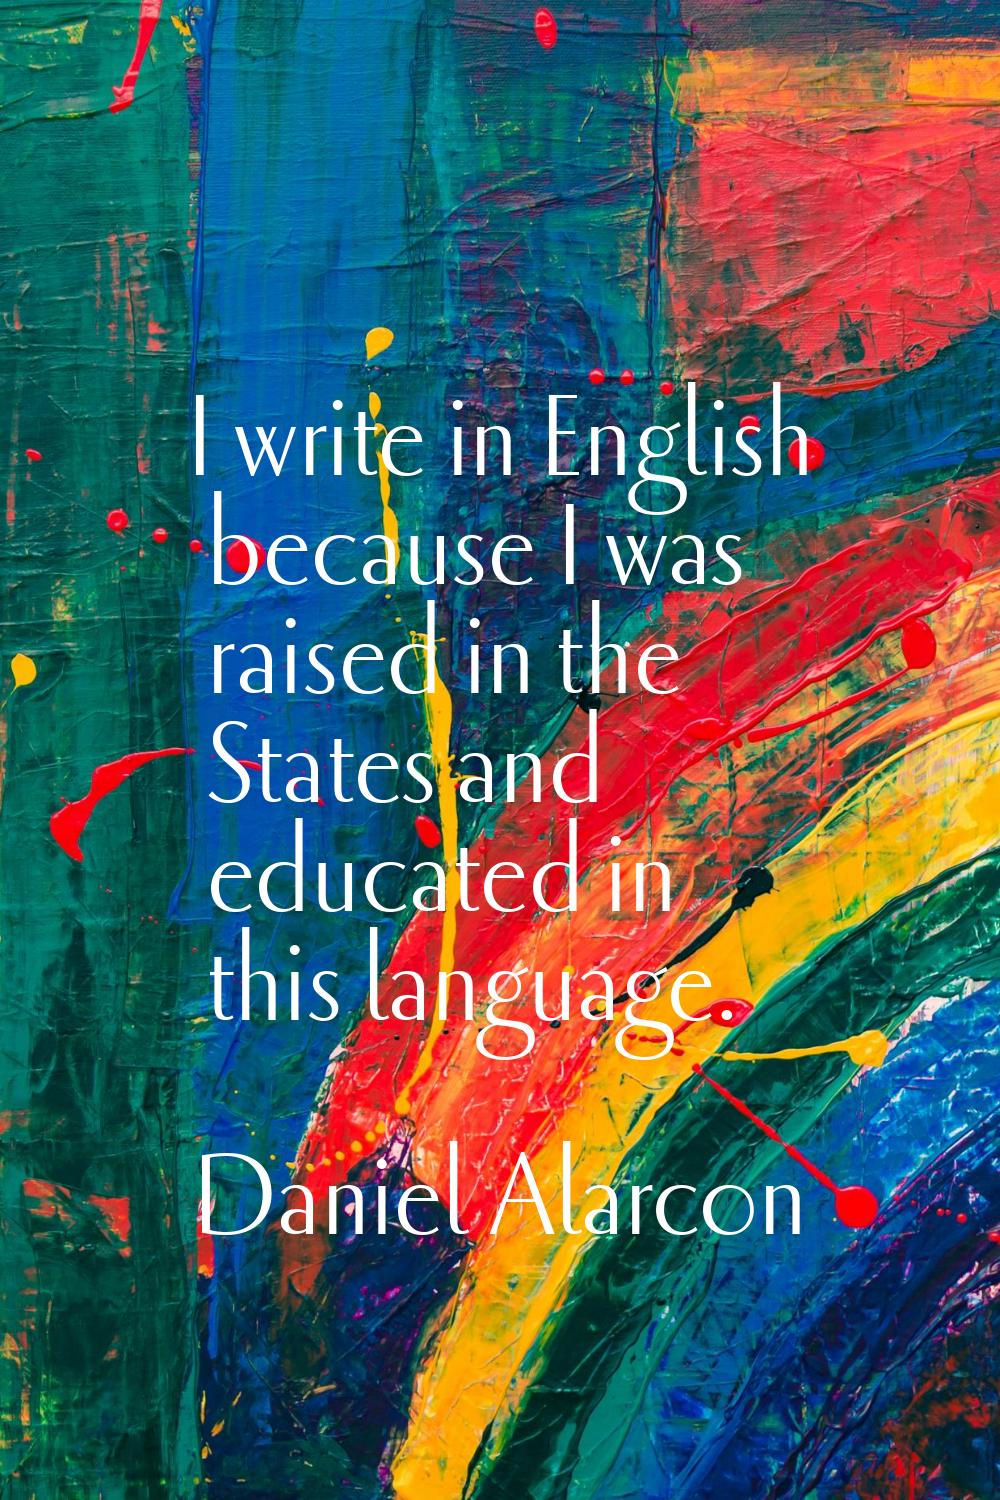 I write in English because I was raised in the States and educated in this language.